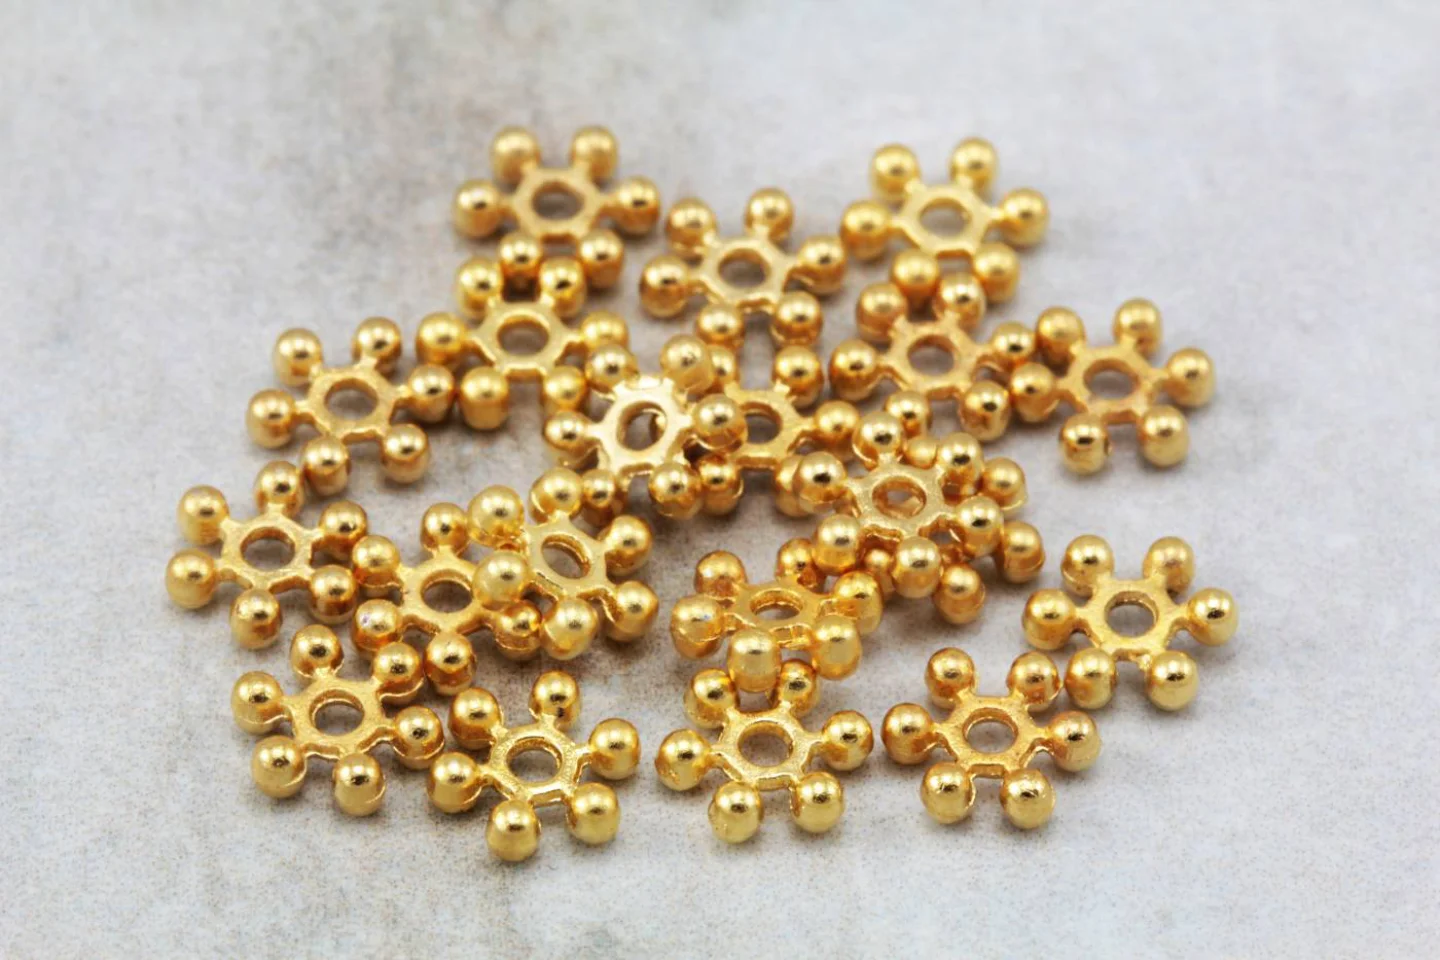 gold-snowflake-shape-rondell-spacer-bead.